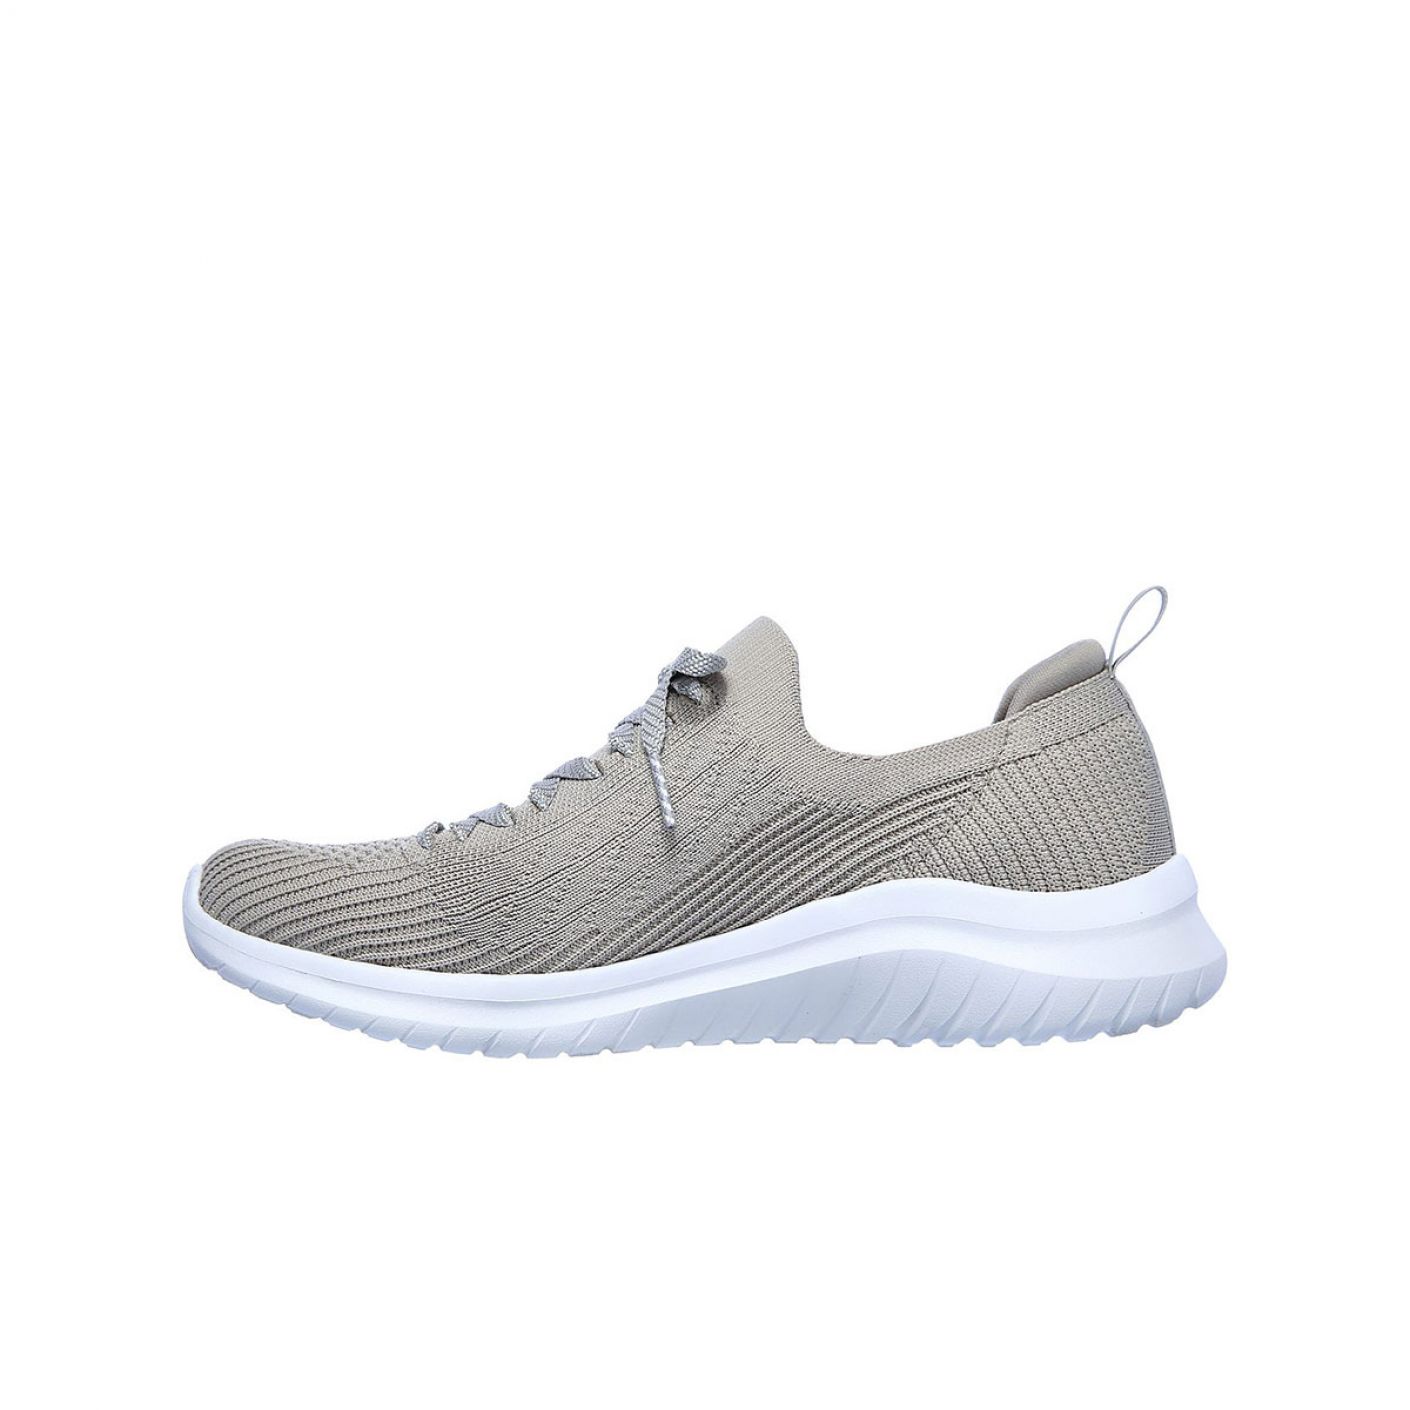 Skechers Ultra Flex 2.0 Flash Illusion Taupe for Women